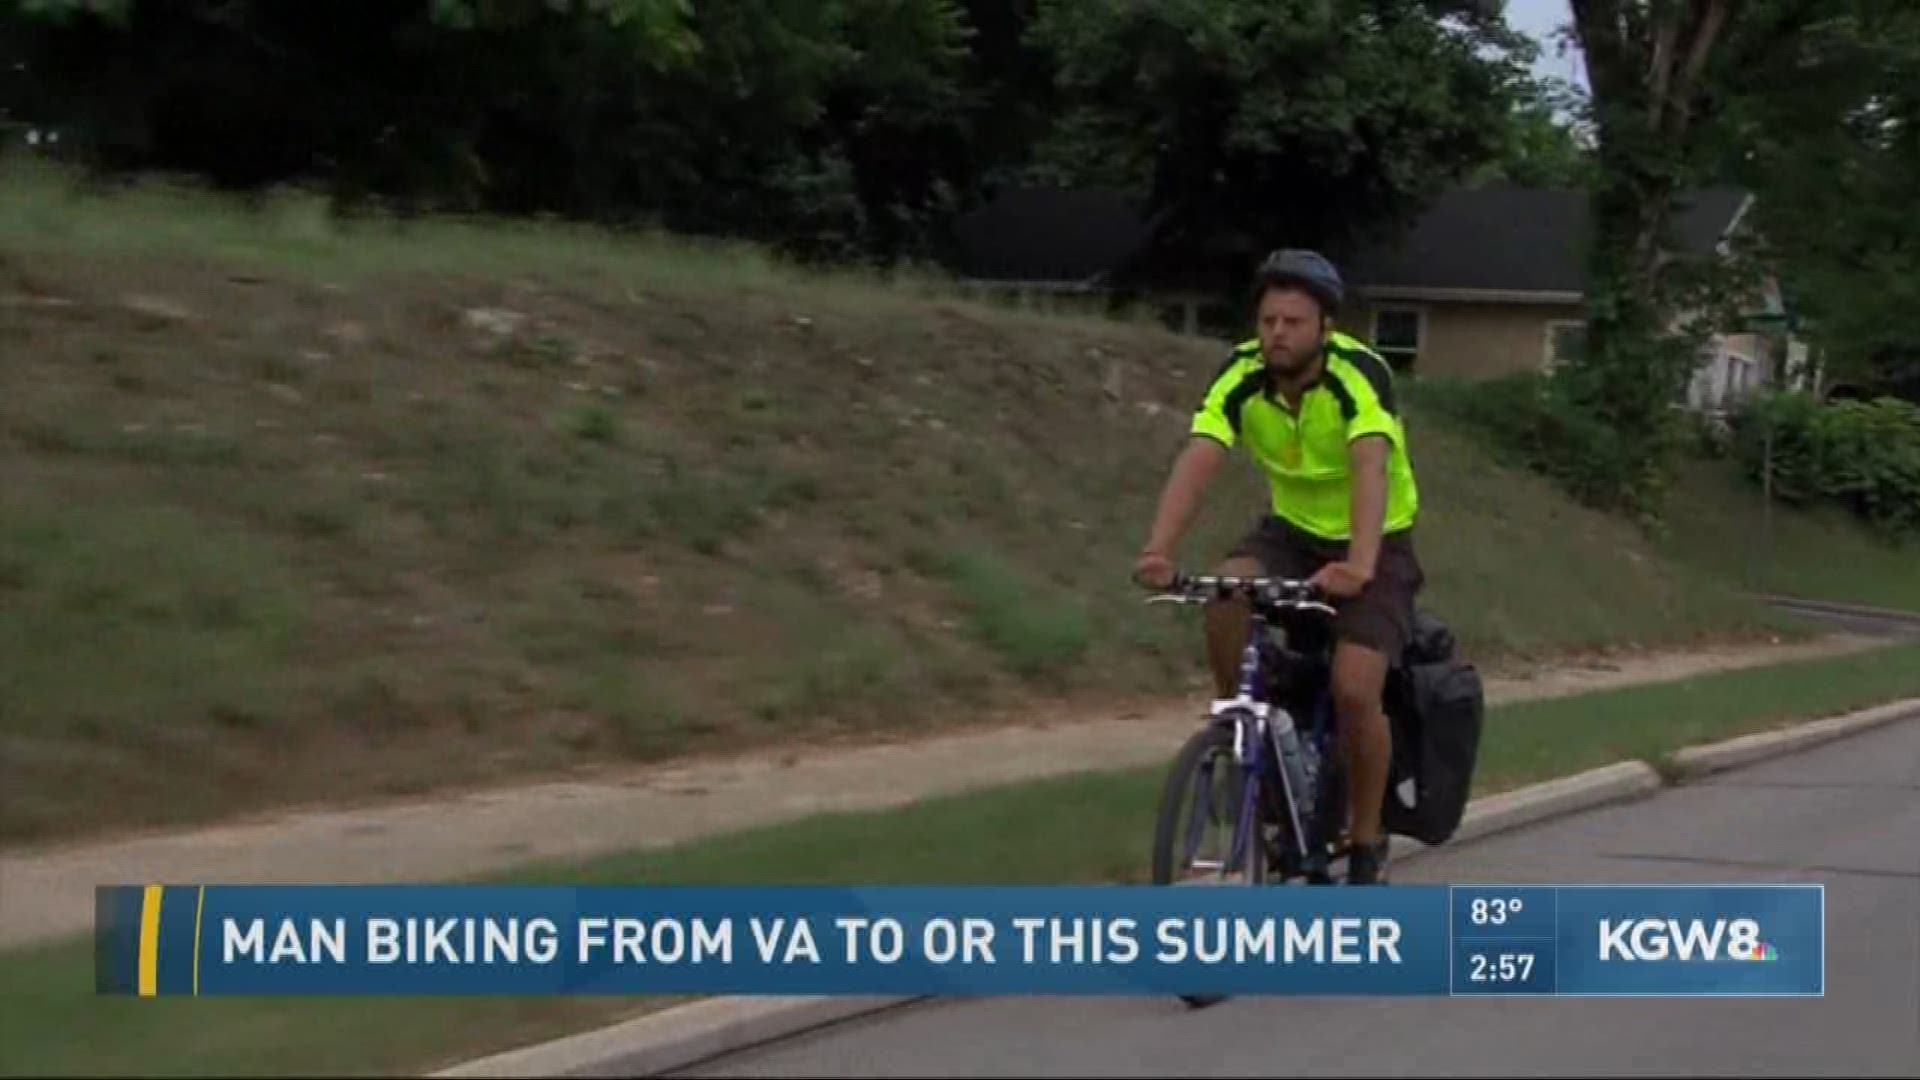 Man biking from VA to OR this summer